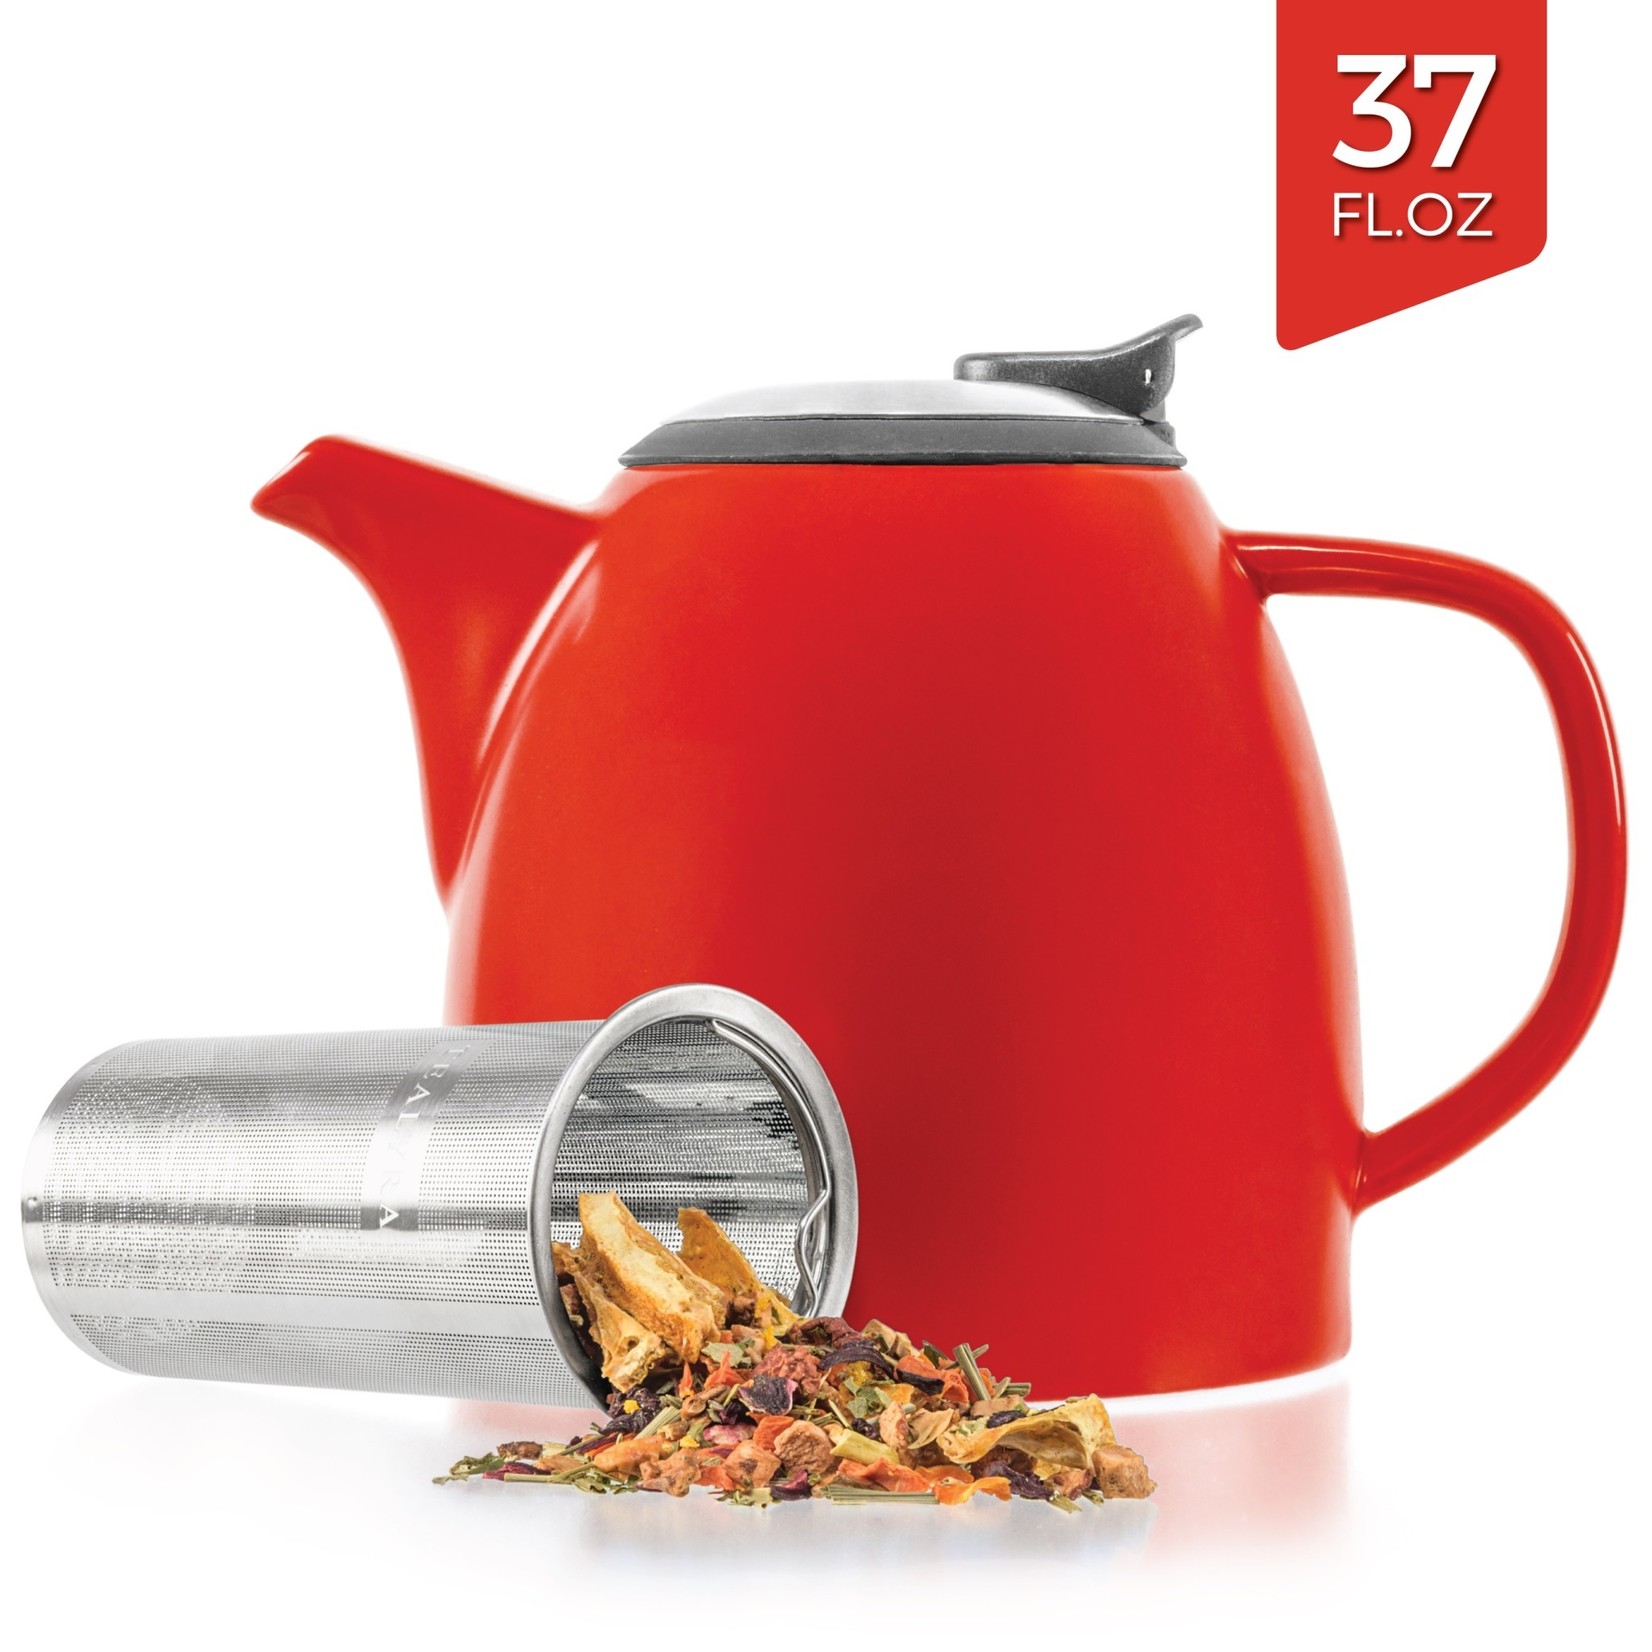 Drago Red Ceramic Teapot With Infuser 37oz